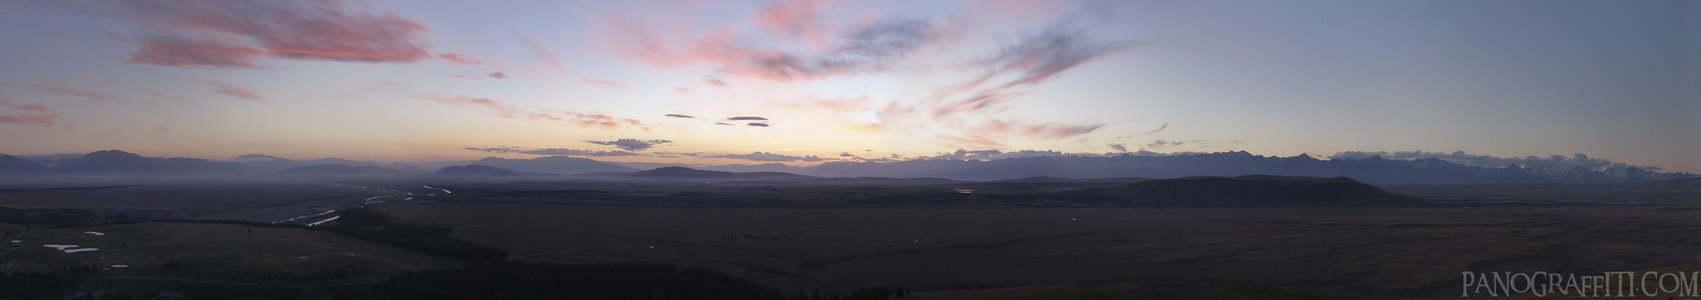 Purple clouds over the Mackenzie Basin - The colors of the sky over the Mackenzie Basin at dusk from Mount John in HDR.